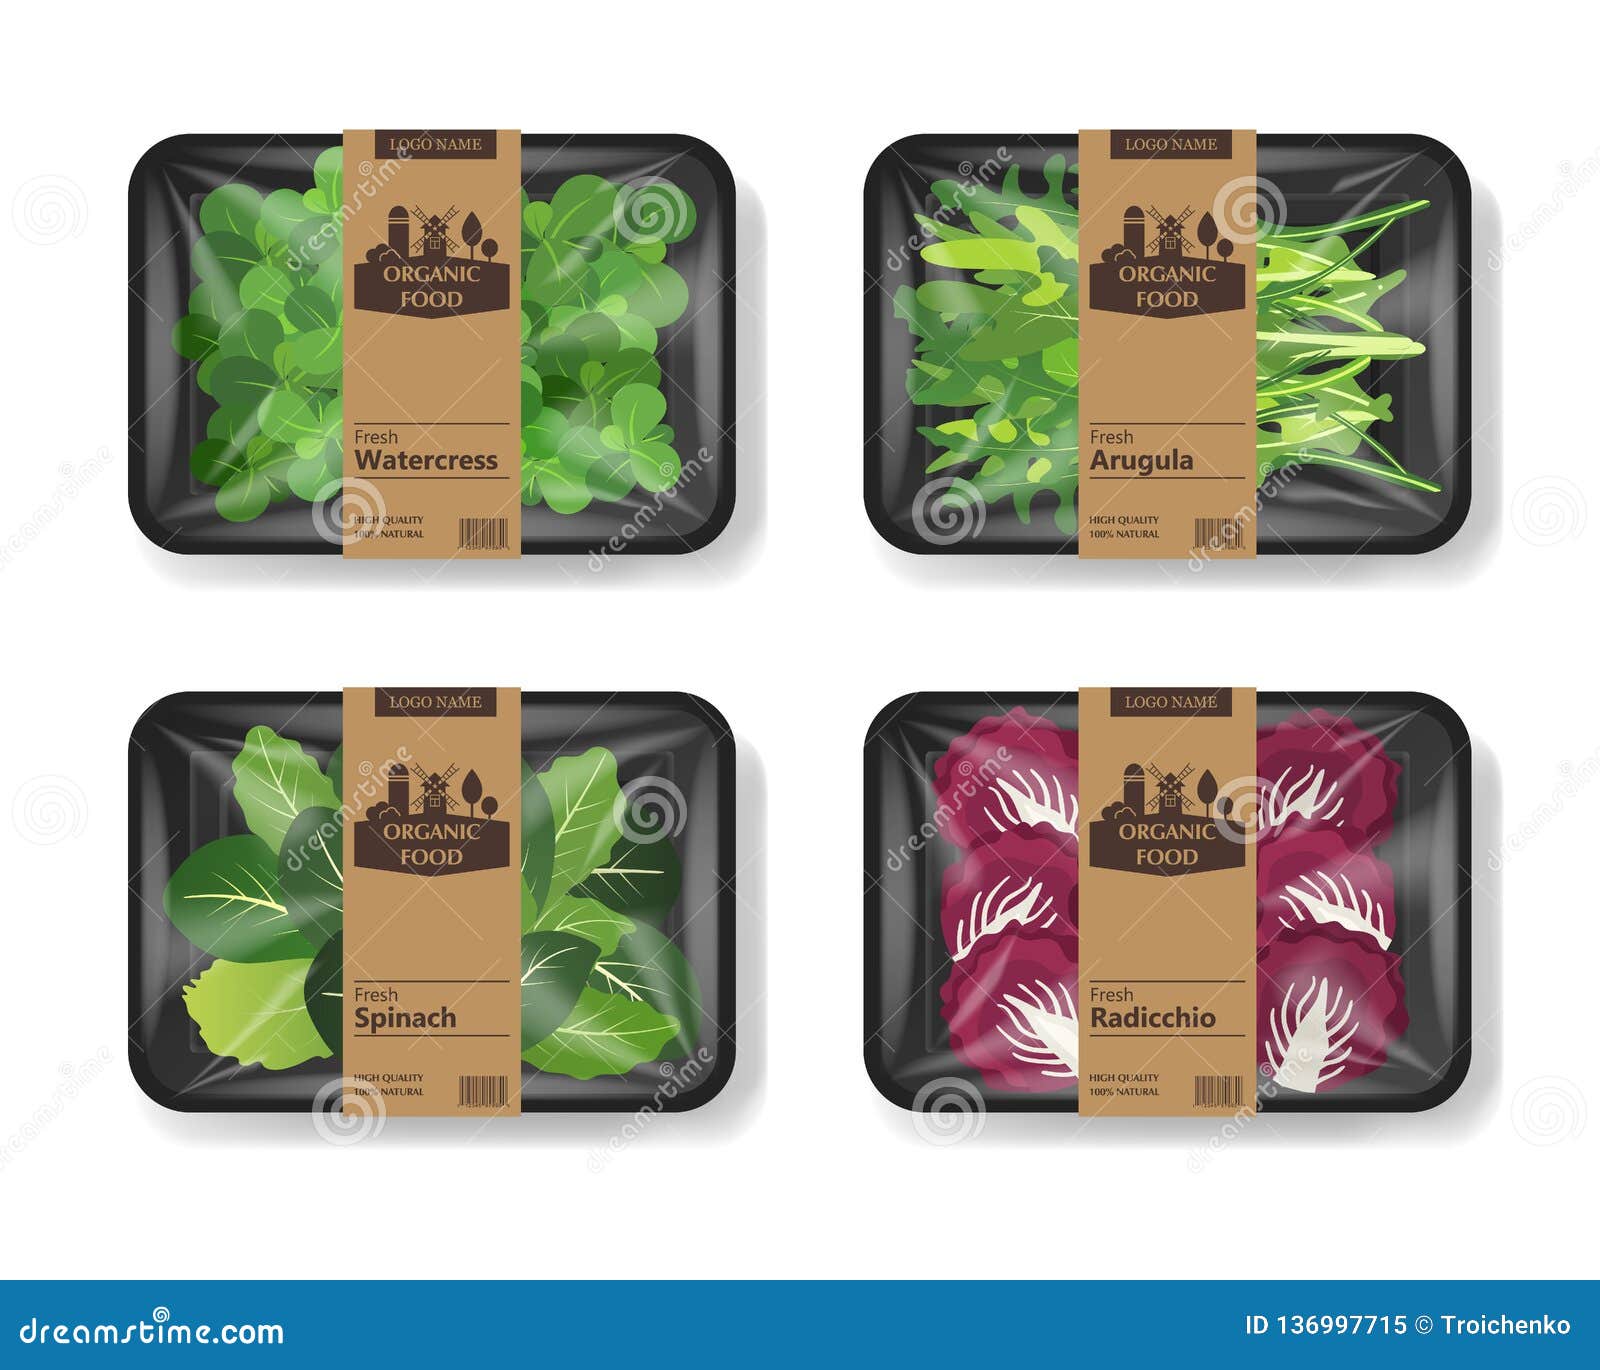 Download Salad Leaves With Plastic Tray Container With Cellophane Cover Retro Design Set Mockup Template For Your Salad Design Stock Vector Illustration Of Farm Fresh 136997715